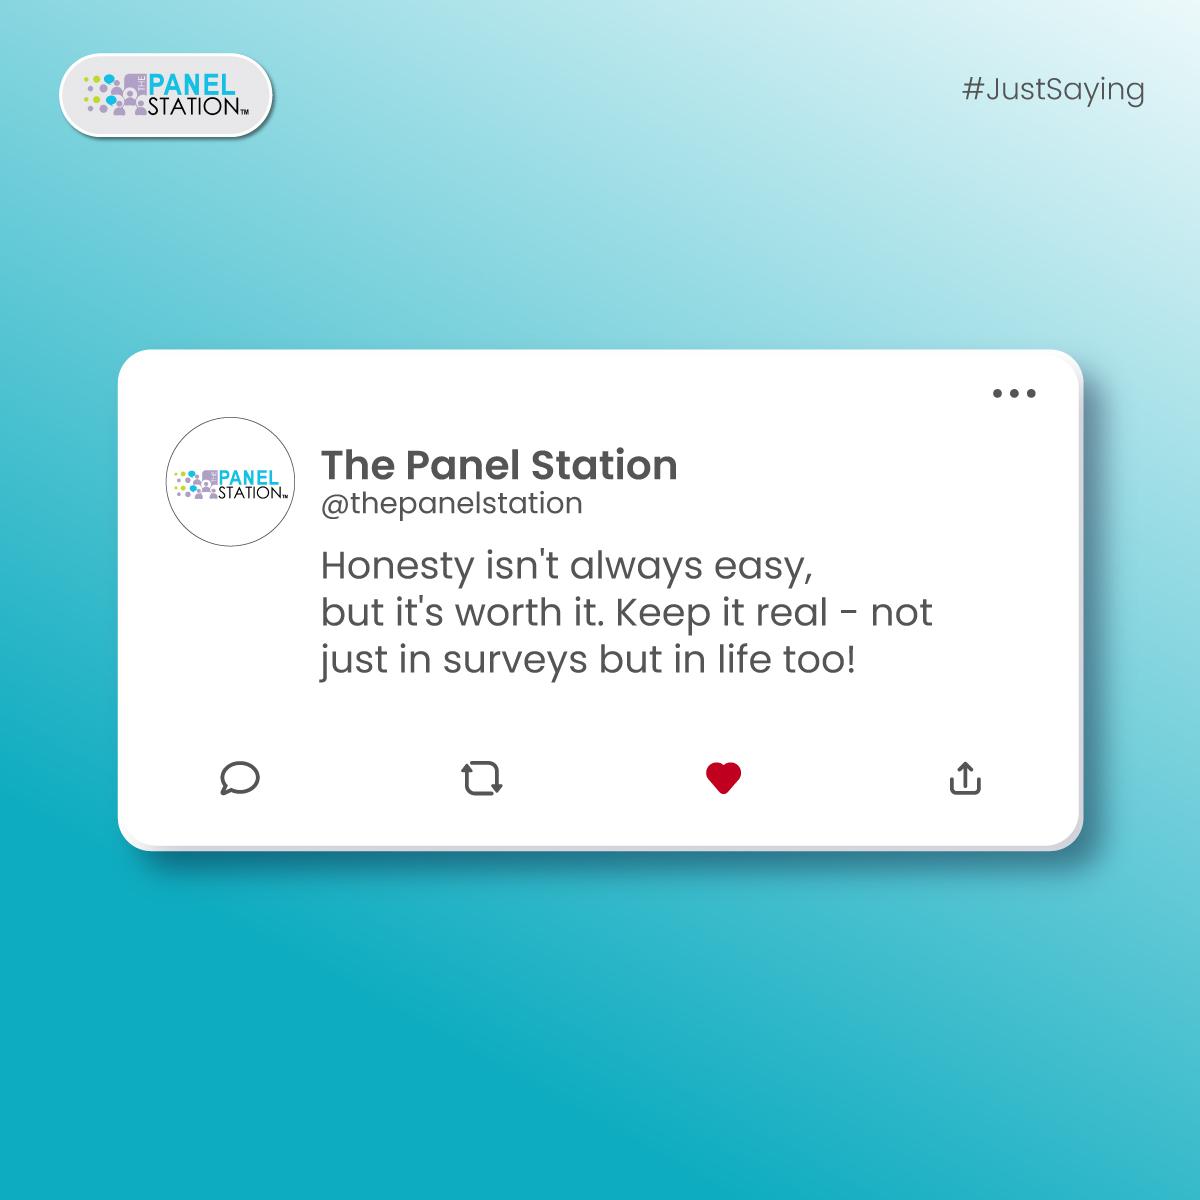 Embrace the authenticity, not just in surveys but in every chapter of life!
Keep it real, because genuine vibes always shine brighter. ✨

#thepanelstation #tps #onlinesurvey #paidsurveys #earnmoney #vouchers #cash #extraincome #life #honest #honesty #honestlyworded #honestreview